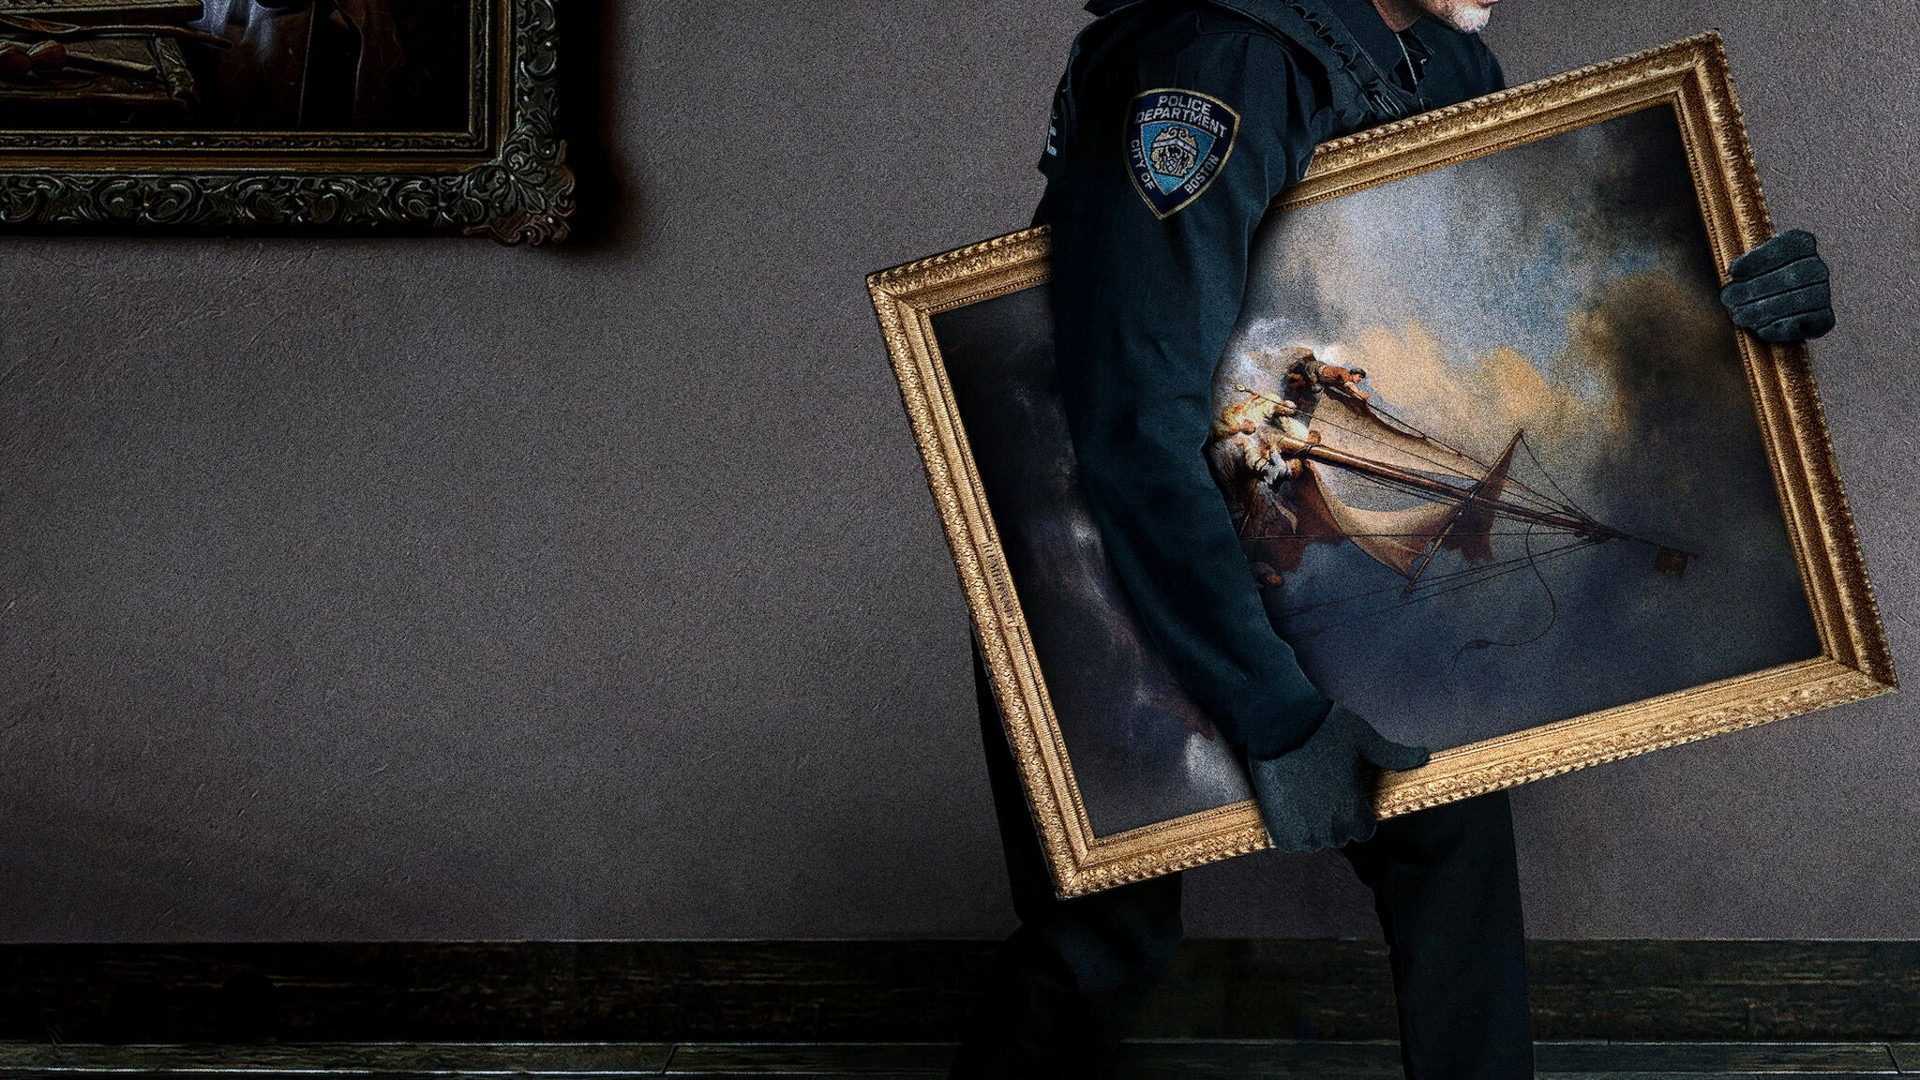 Show This is a Robbery: The World's Biggest Art Heist